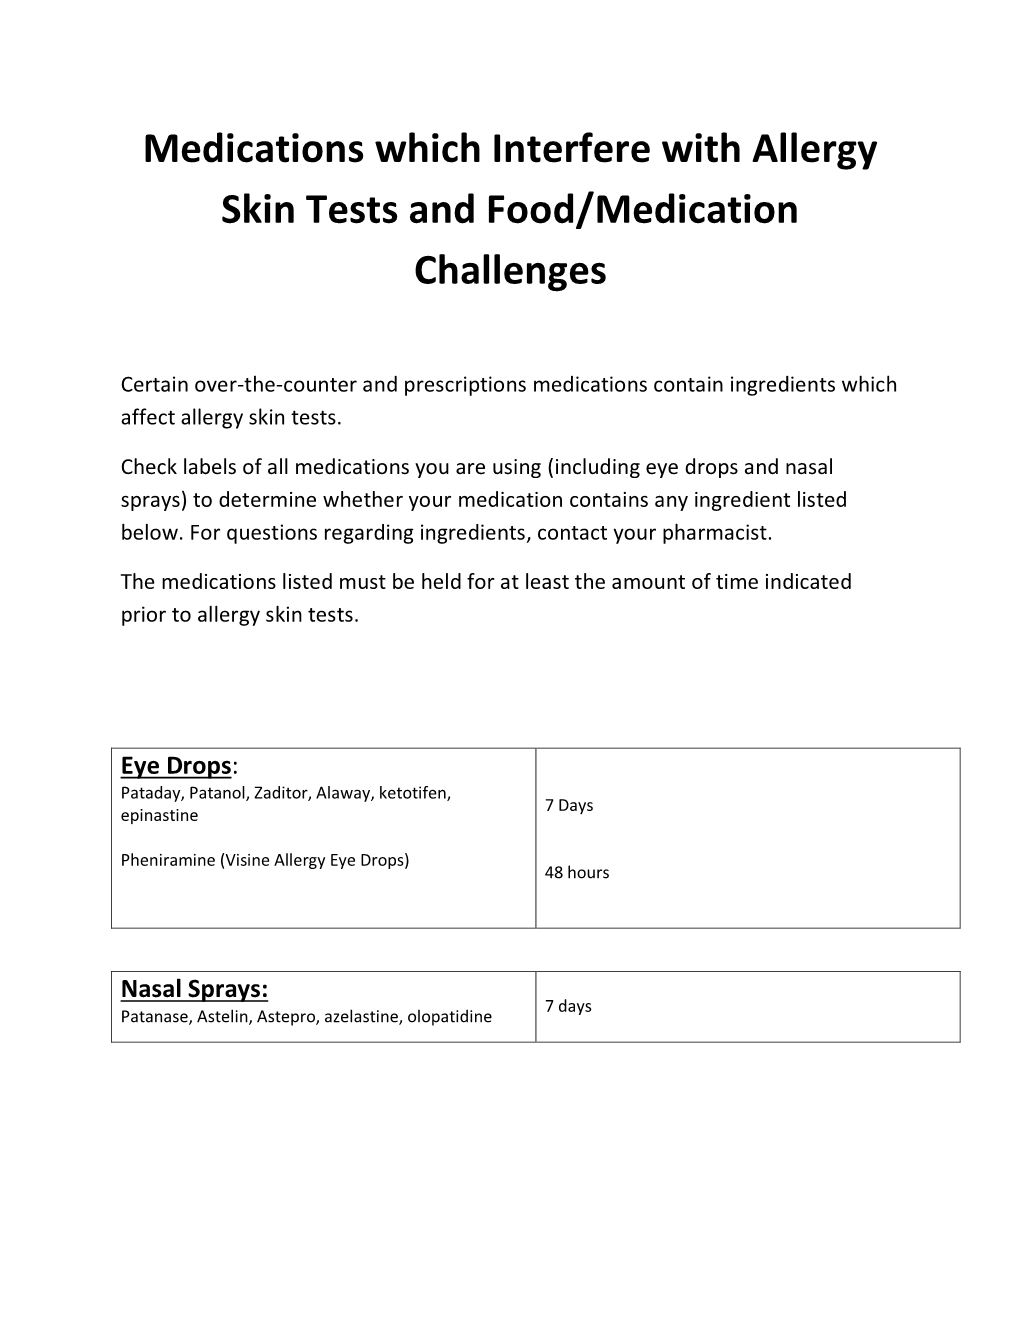 Medications Which Interfere with Allergy Skin Tests and Food/Medication Challenges